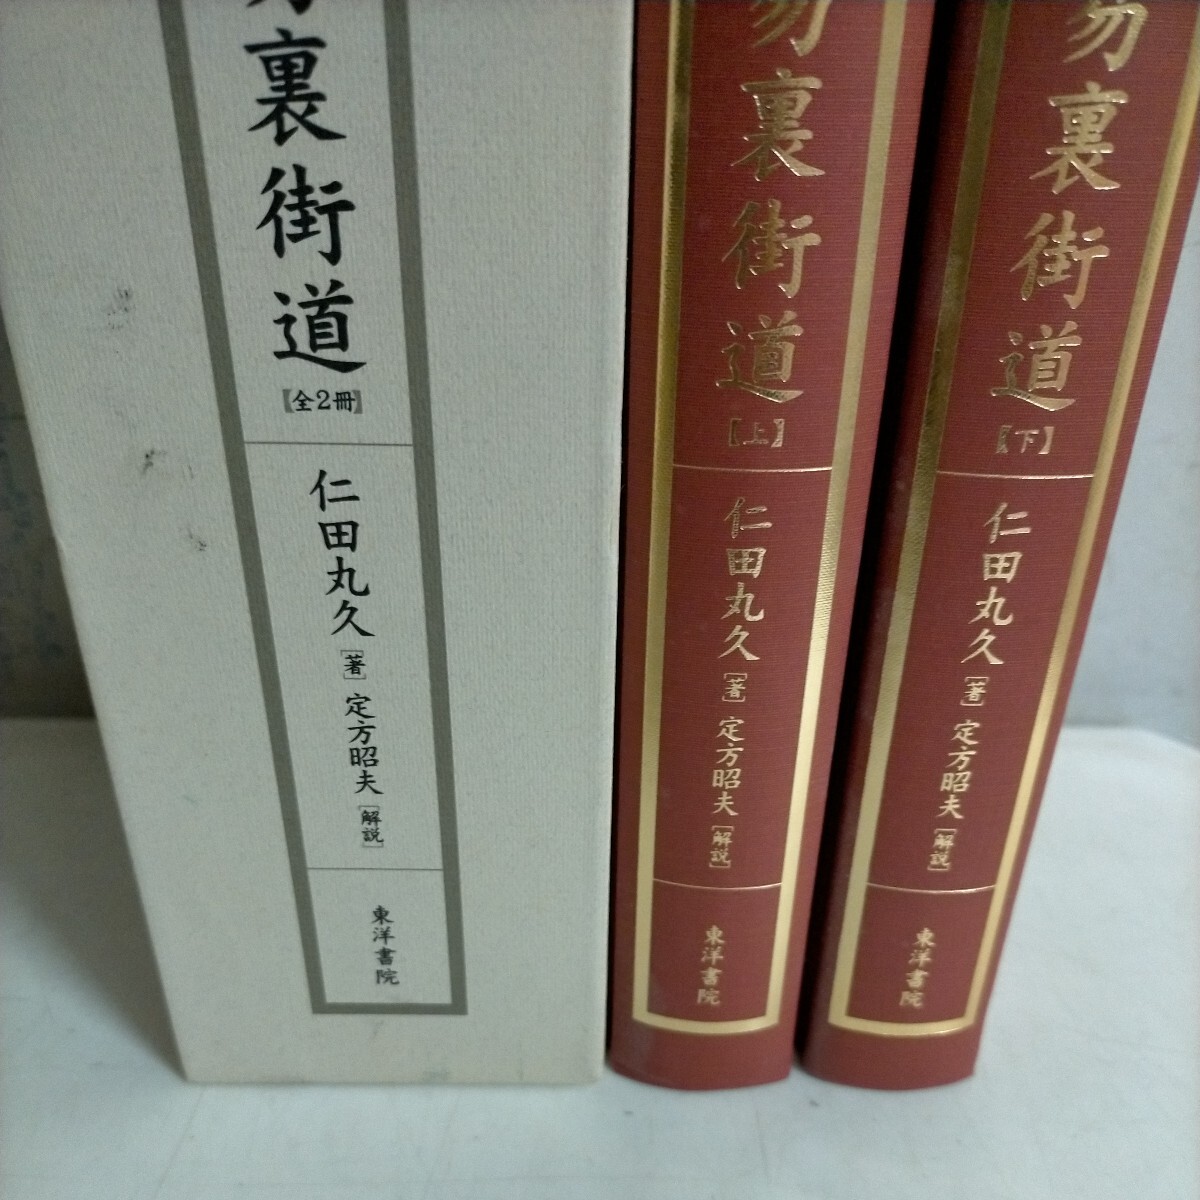 .. reverse side street road all 2 pcs. . rice field circle .. person . Hara higashi foreign book .280 part limitation ^ secondhand book / aged deterioration because of scorch attrition some stains scratch have / study of divination / divination 